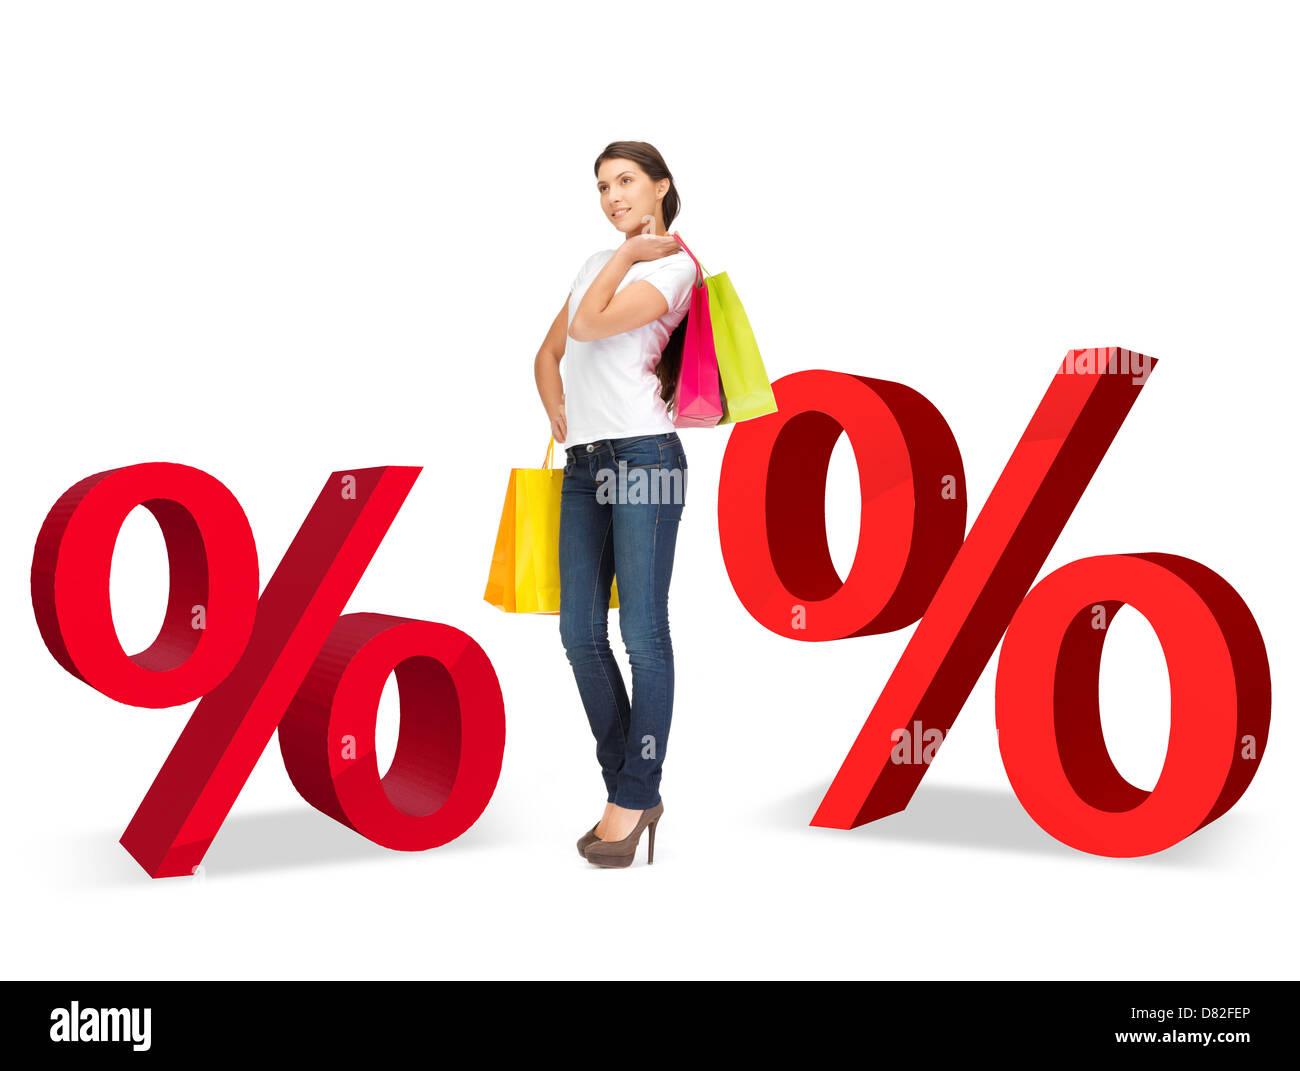 woman with shopping bags and percent signs Stock Photo